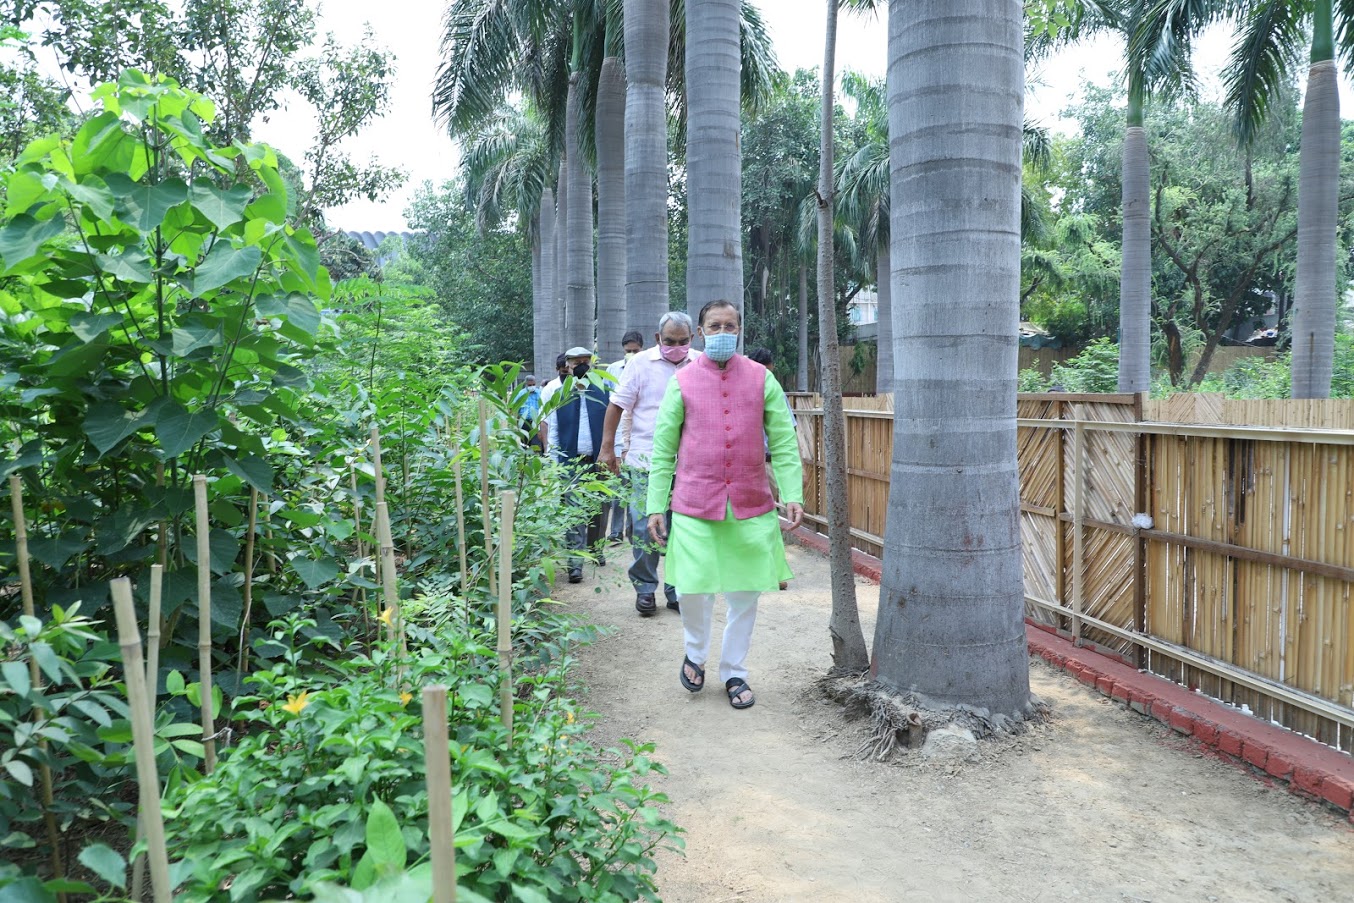 Urban forest - Inaugurated by Shri Prakash Javadekar, Minster of Environment and climate change in the presence of Shri Rajiv Mehrishi CAG of India on 2nd July 2020